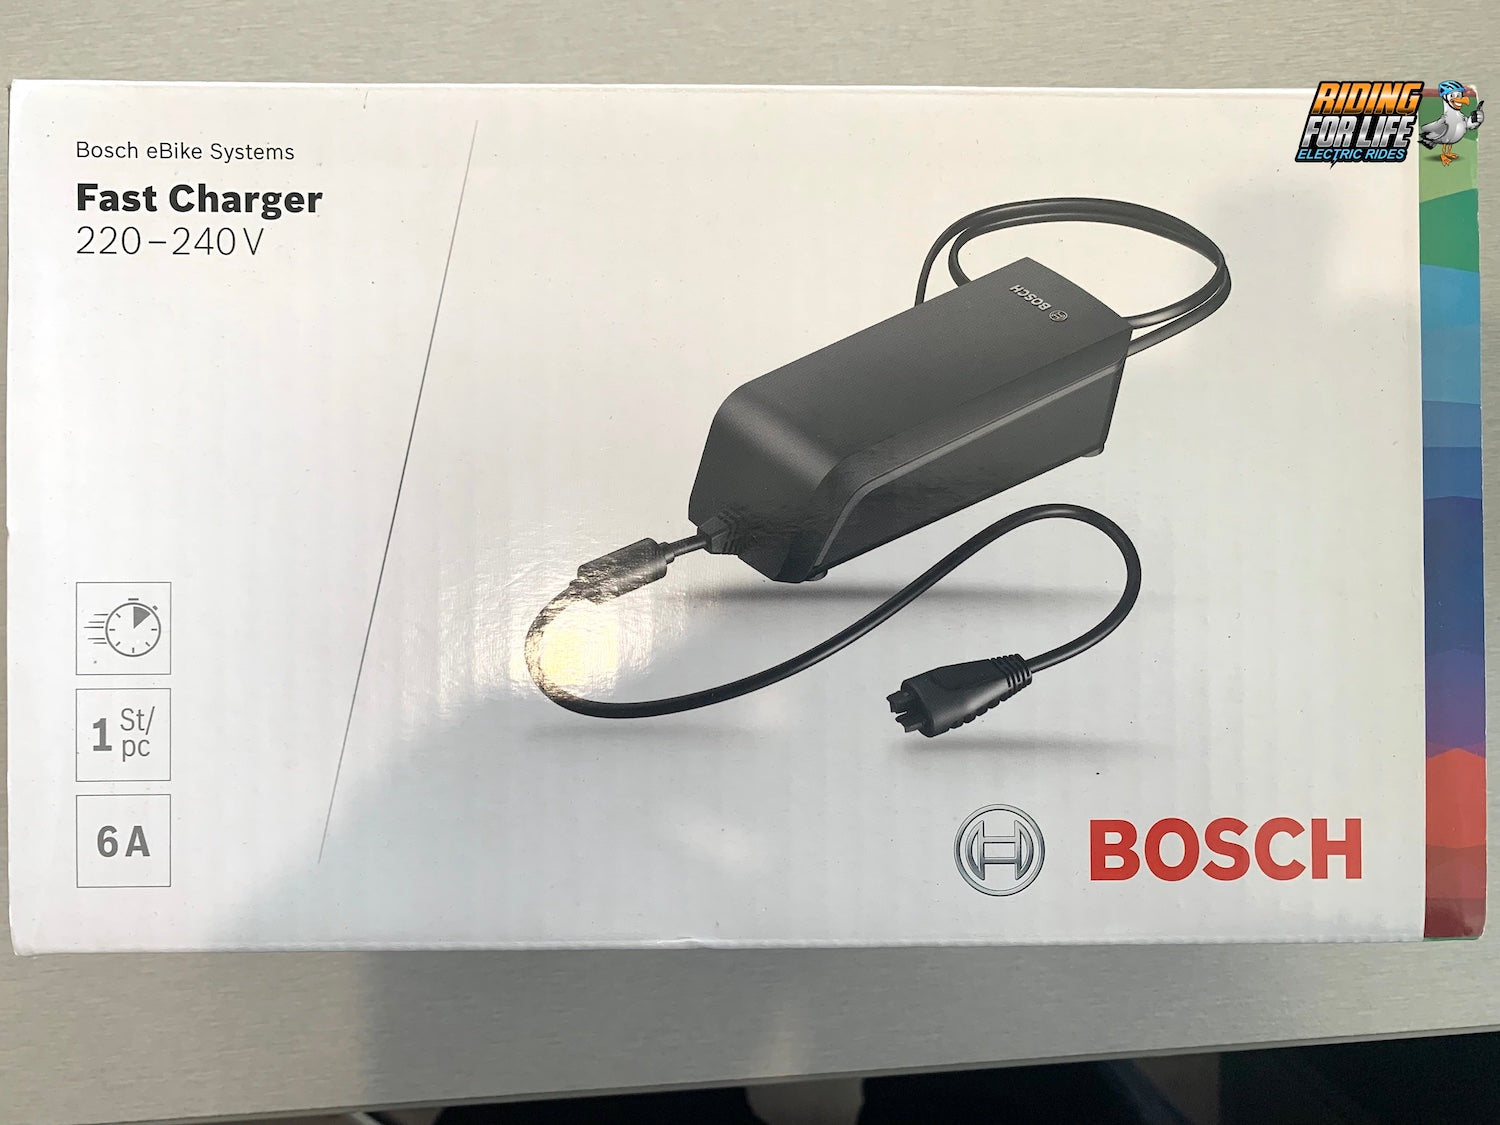 hengel chatten Resoneer Bosch Fast Charger 6A (220-240V) – Riding For Life